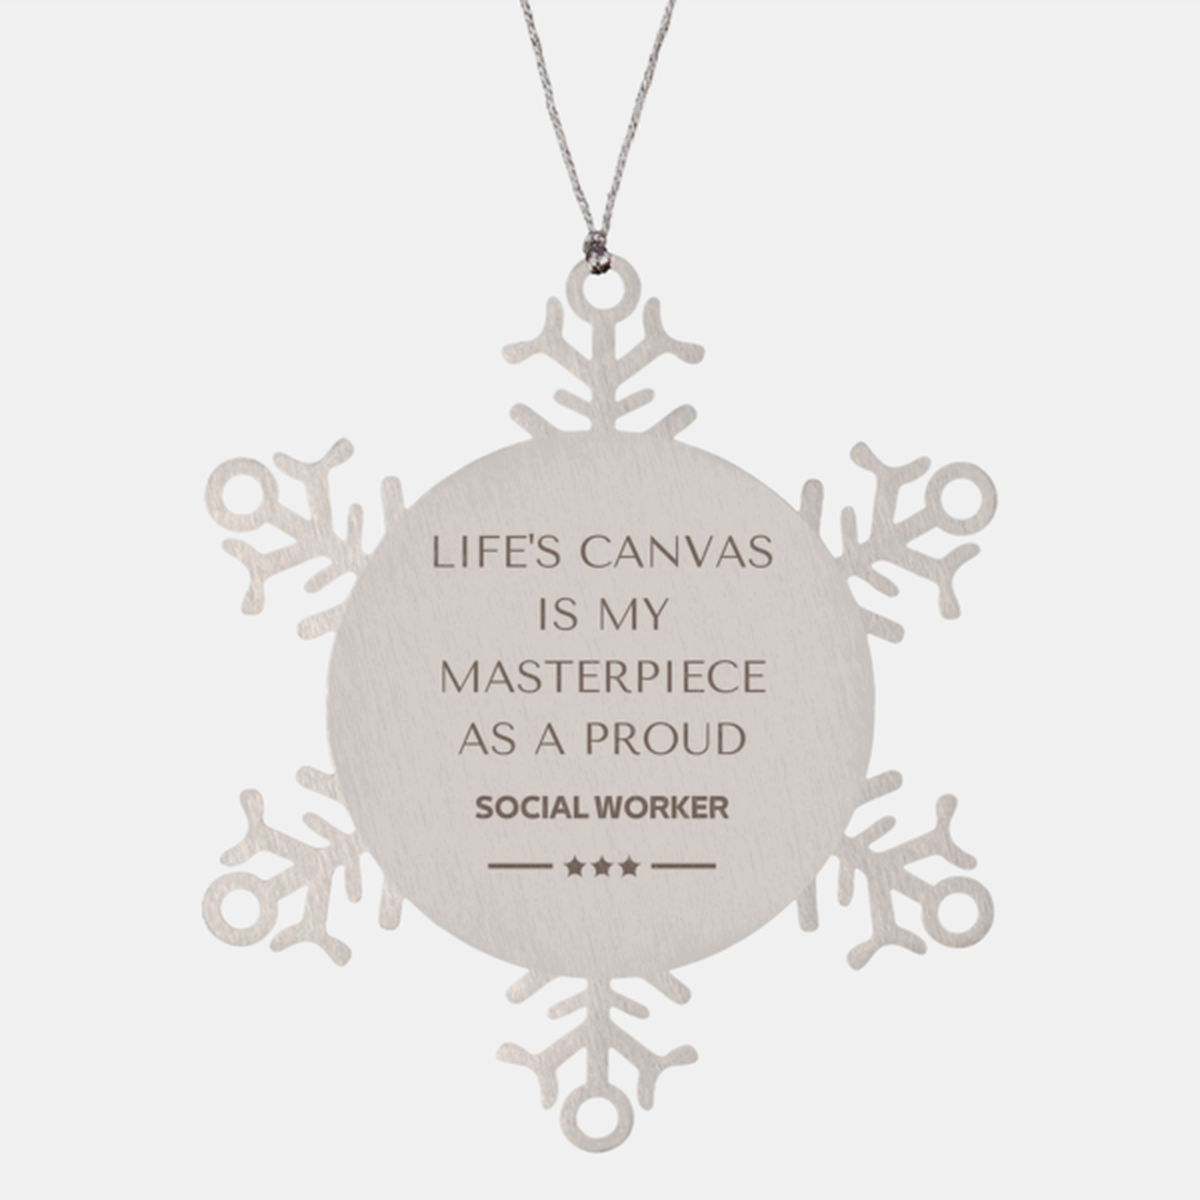 Proud Social Worker Gifts, Life's canvas is my masterpiece, Epic Birthday Christmas Unique Snowflake Ornament For Social Worker, Coworkers, Men, Women, Friends